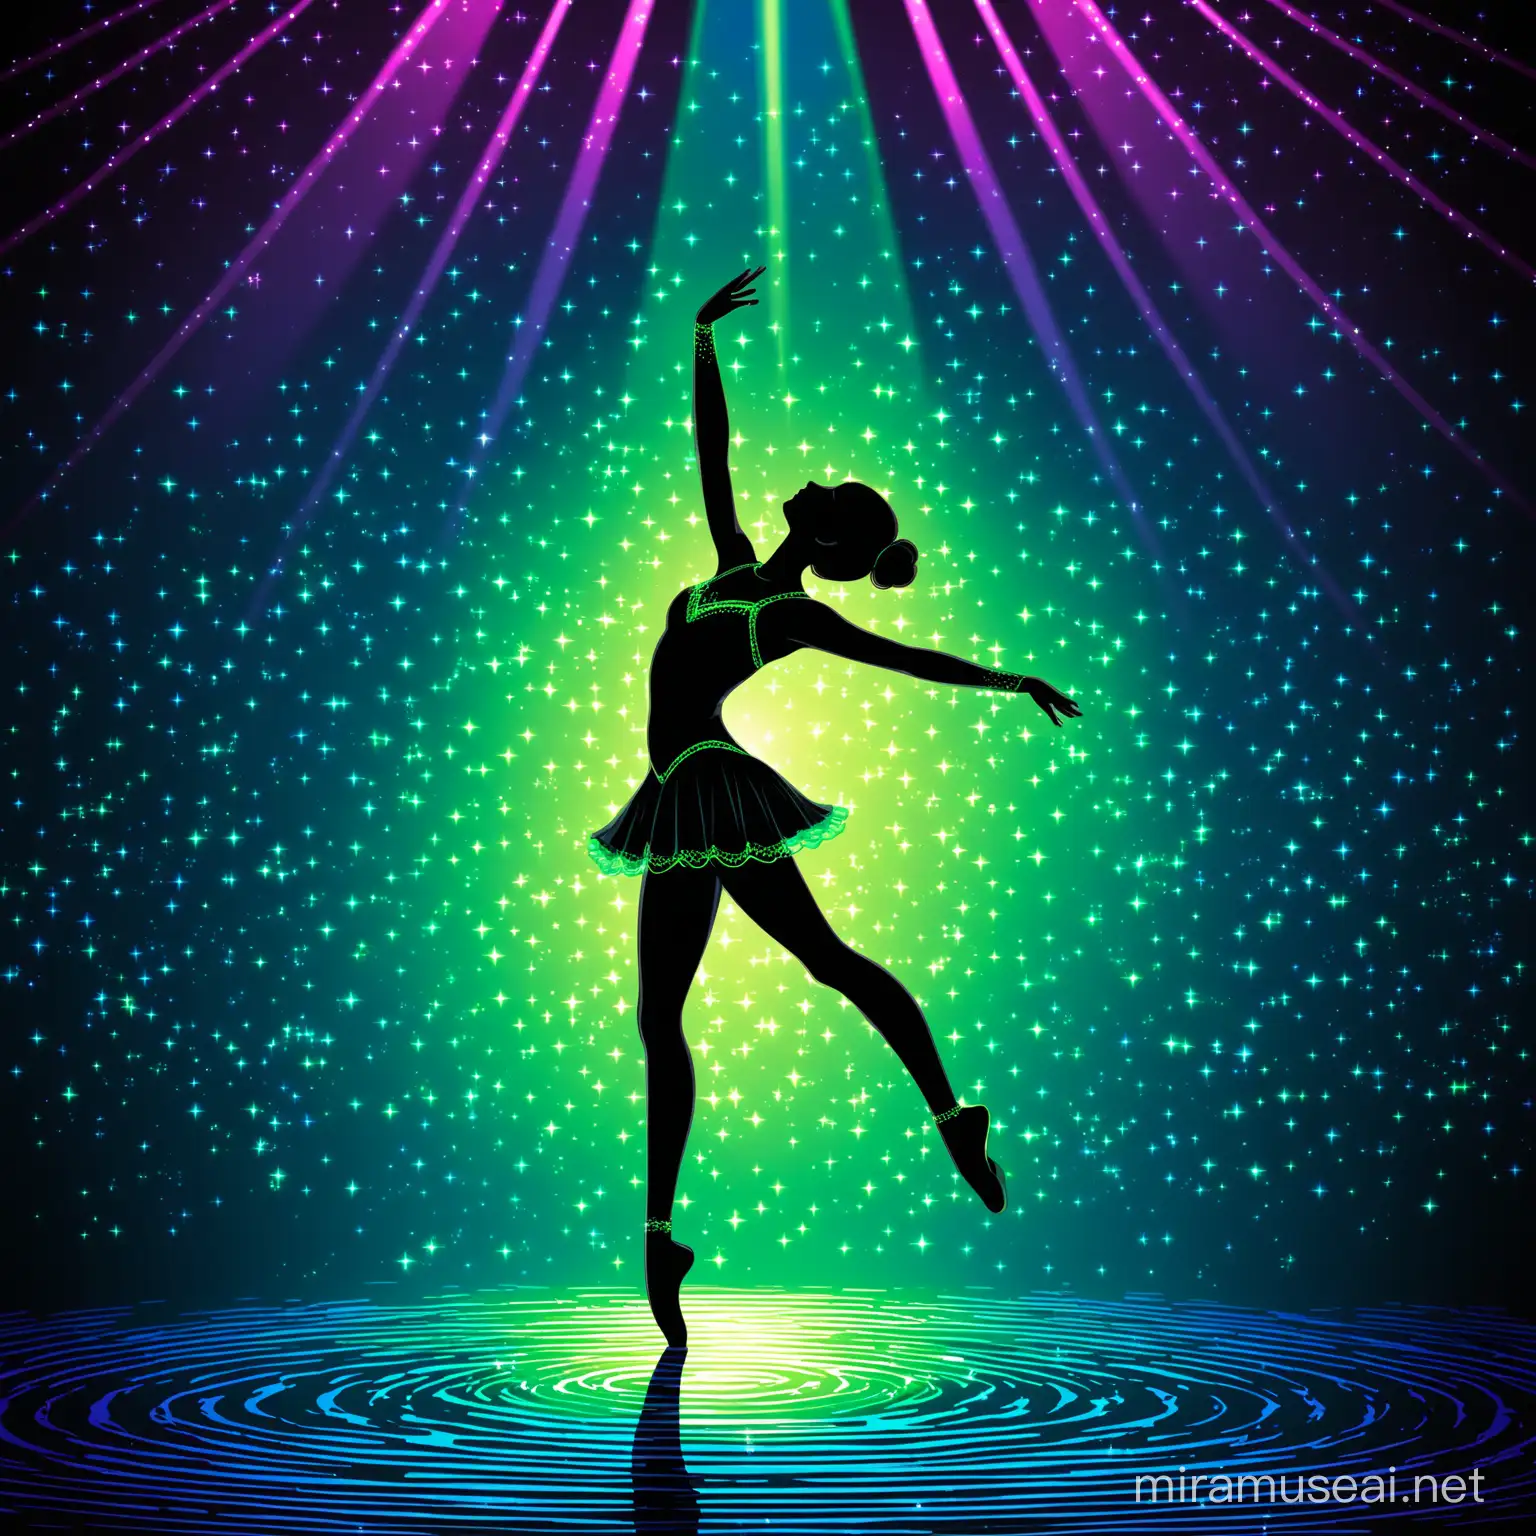 sillouette of a ballerina dancing
appreance-female/ beautiful/ full body/ neon green toto with noir blue sparkles (with ripples and waves) / leg out with arms overhead touching/
background- stage/ noir brown-red empty threater/ 